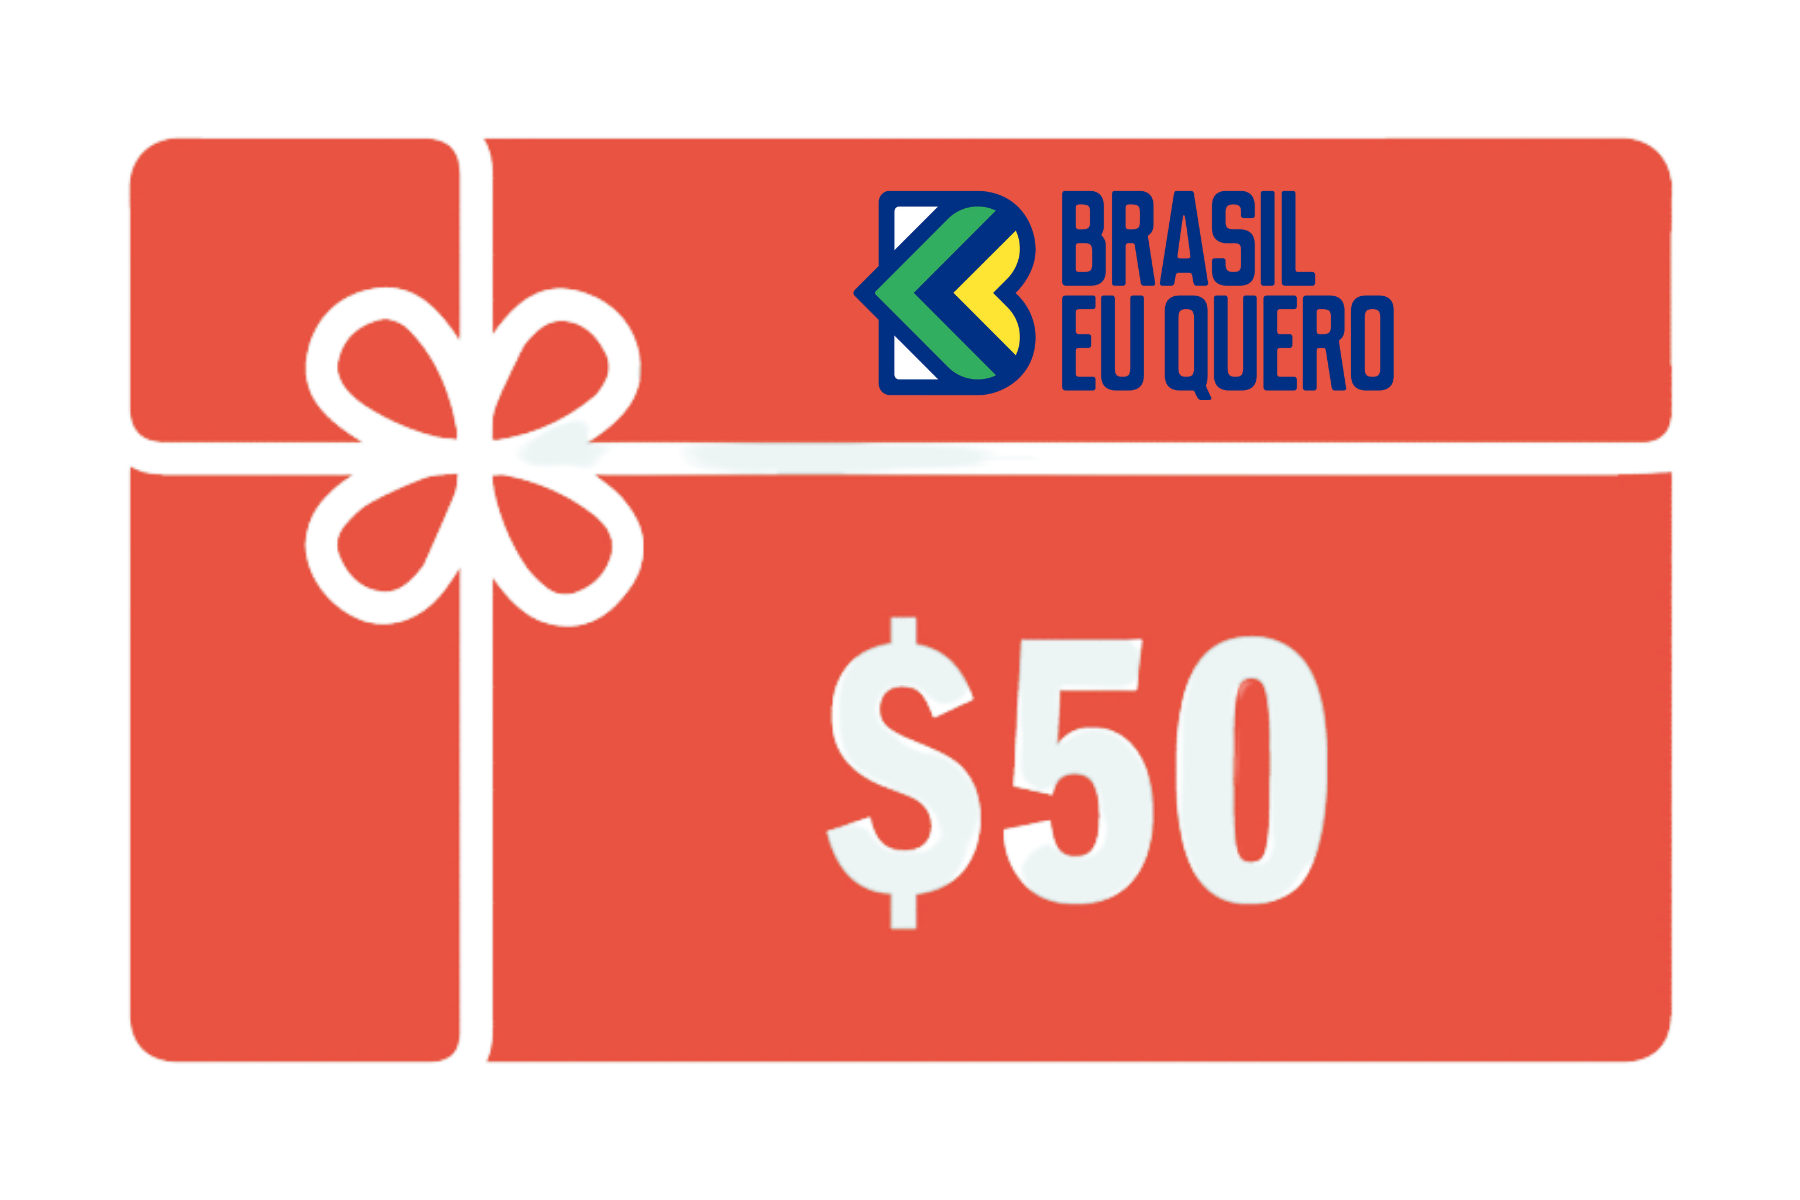 Top 7 Most Common Gift Cards You Can Buy In Brazil - Cardtonic